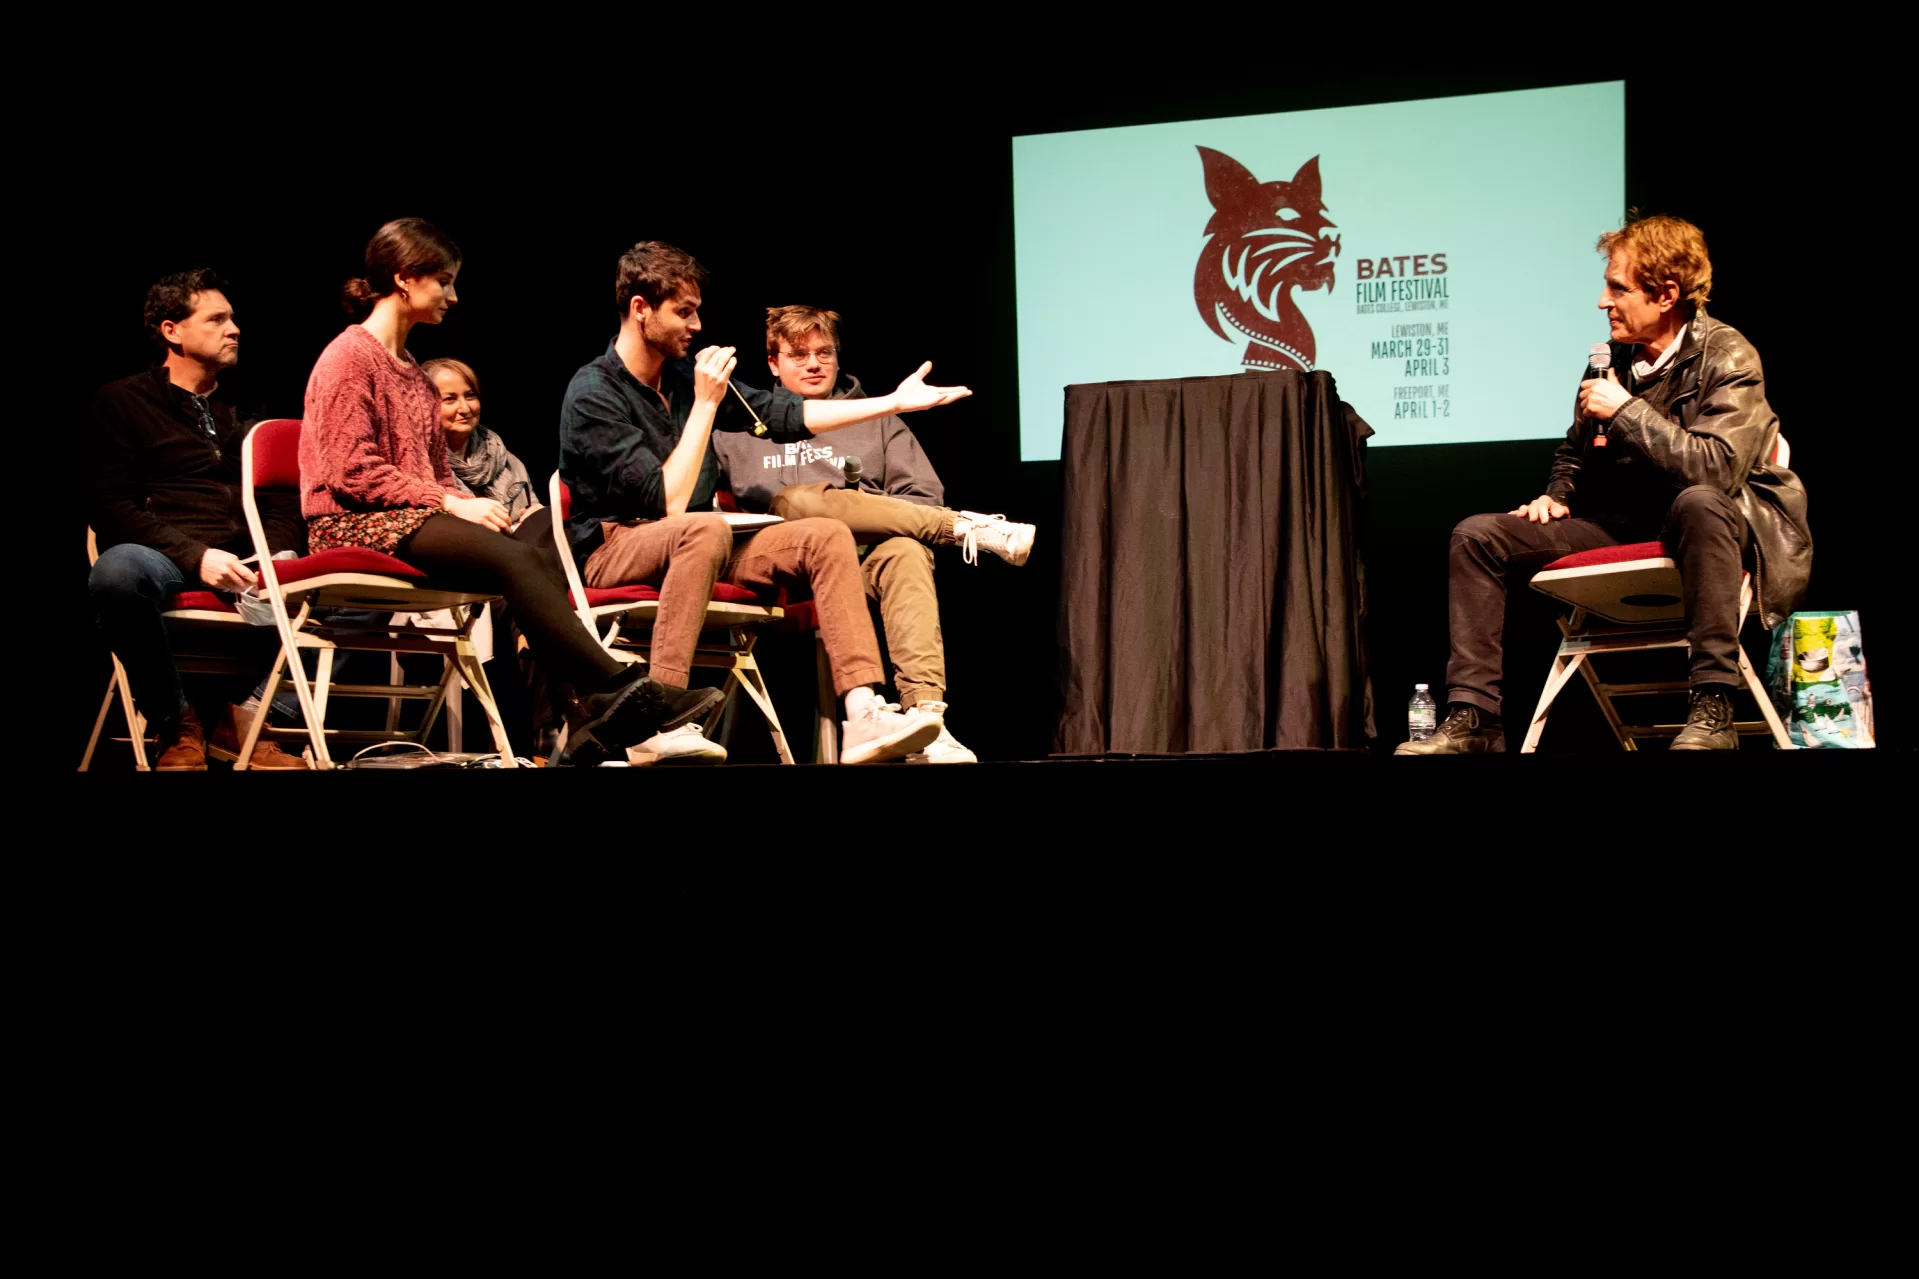 Bates Film Festival guests John Turturro and John Shea ’70 participate in two back to back Q&As in Schaeffer Theater. Turturro was from 2:30-4 p.m. Shea was from 4:30 to 6 p.m. Faculty members Jon Cavallero, Katalin Vecsey and Tim Dugan joined students from the Cavallero’s festival class to pose questions to the two actor/director/writers.